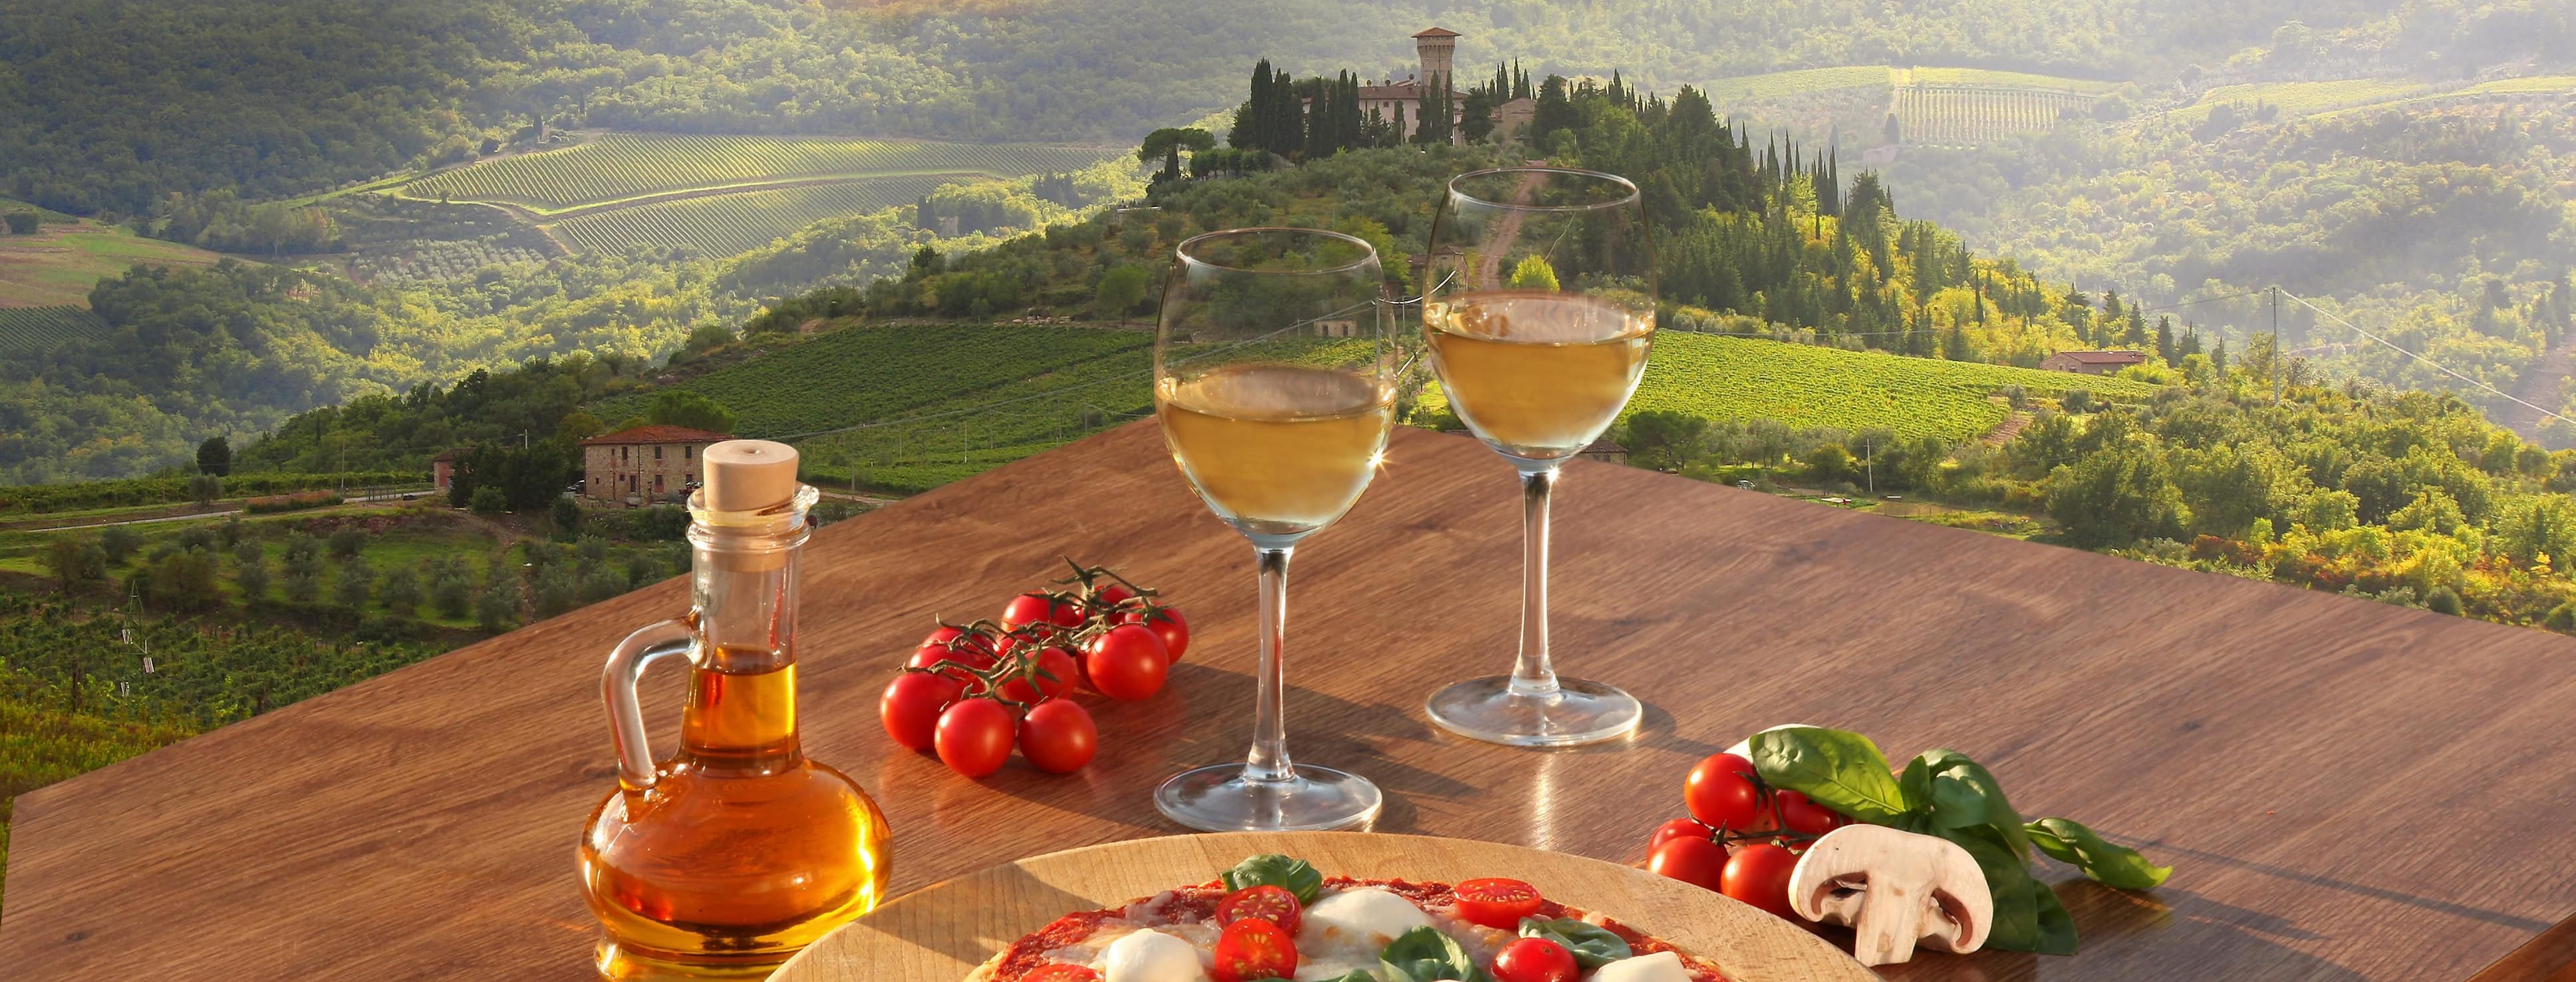 Why Study Food and Wine in Italy?